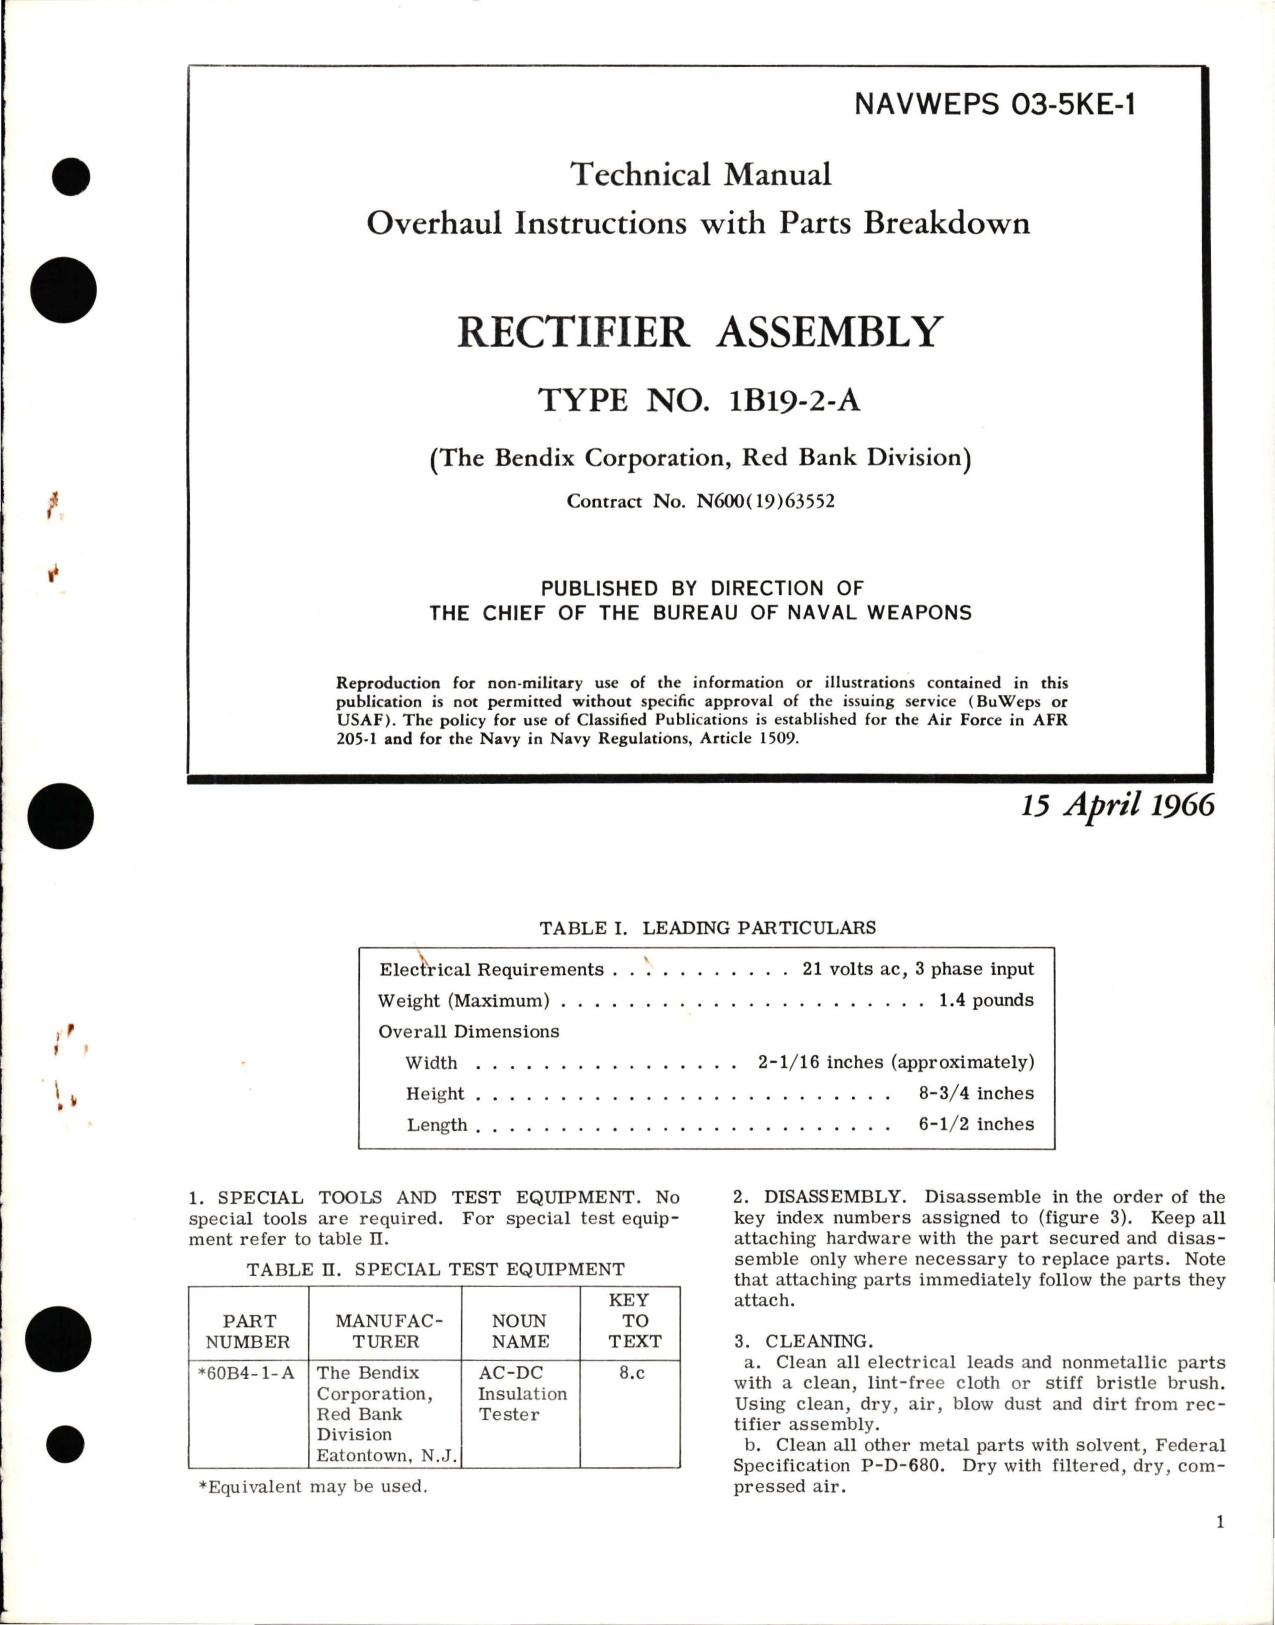 Sample page 1 from AirCorps Library document: Overhaul Instructions with Parts Breakdown for Rectifier Assembly - Type 1B19-2-A